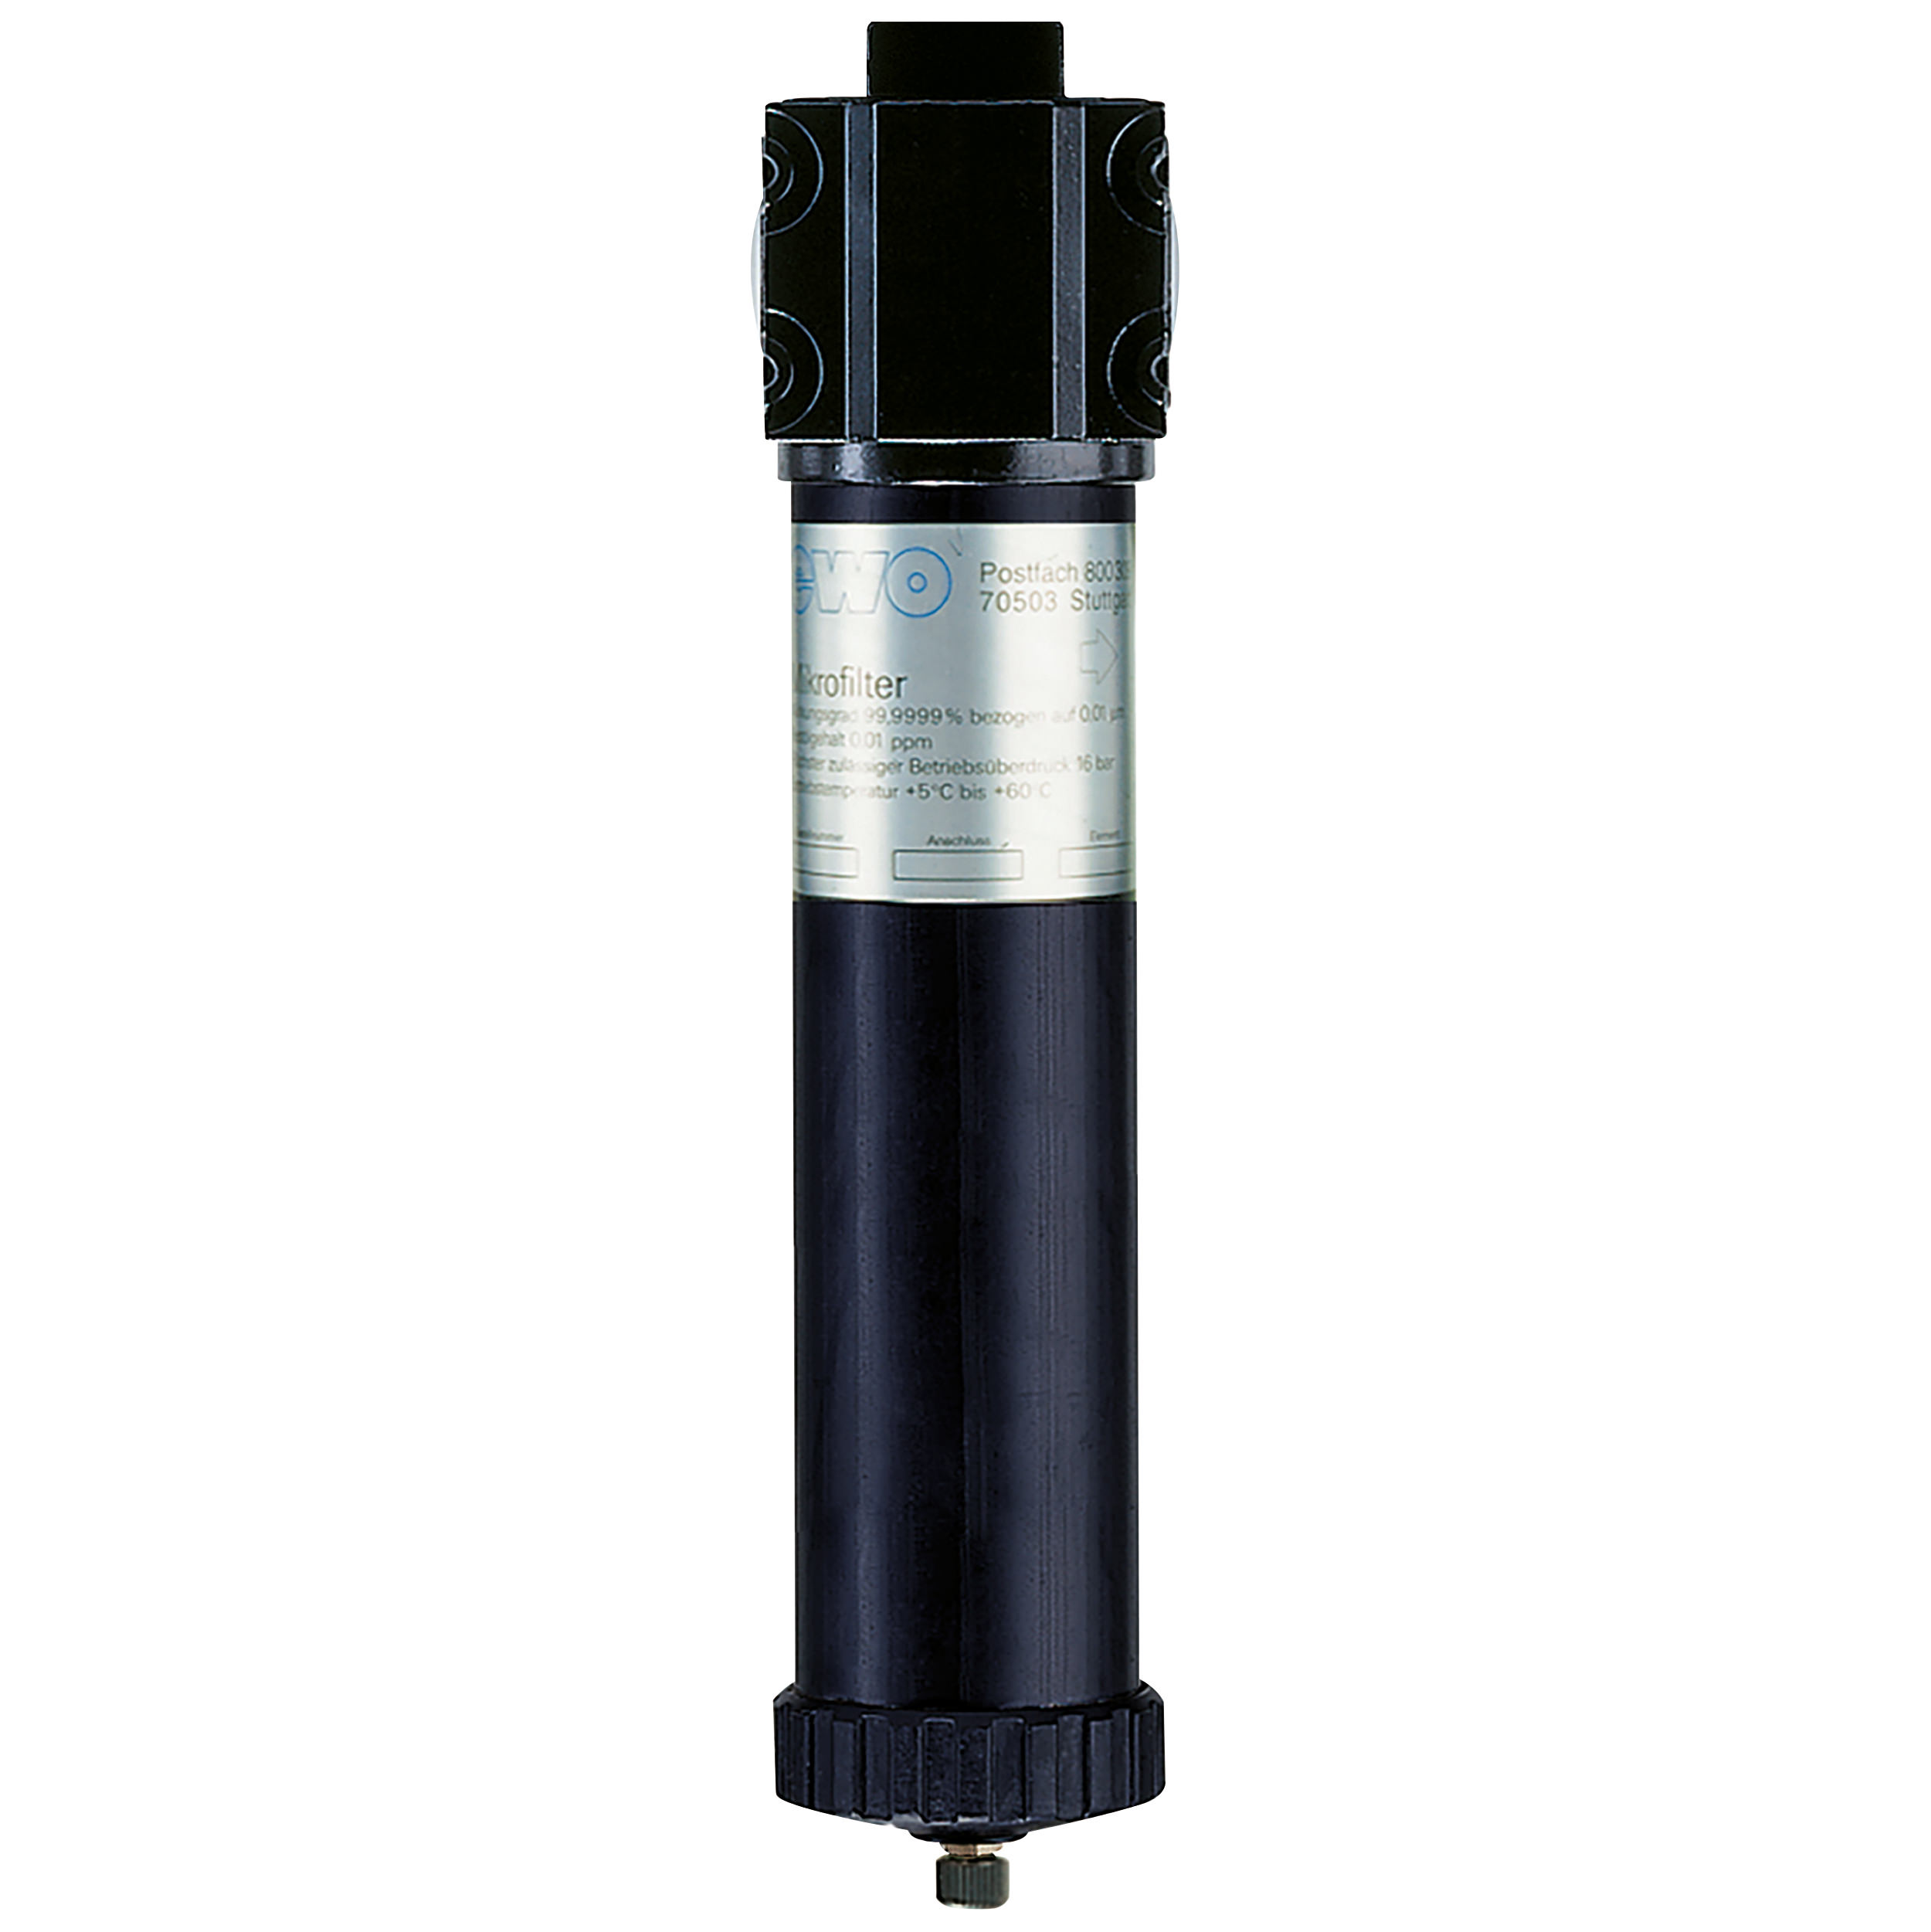 Microfilter, in-/outlet: G1, reduced, BG 90-1, manual drain valve, 4.8 kg